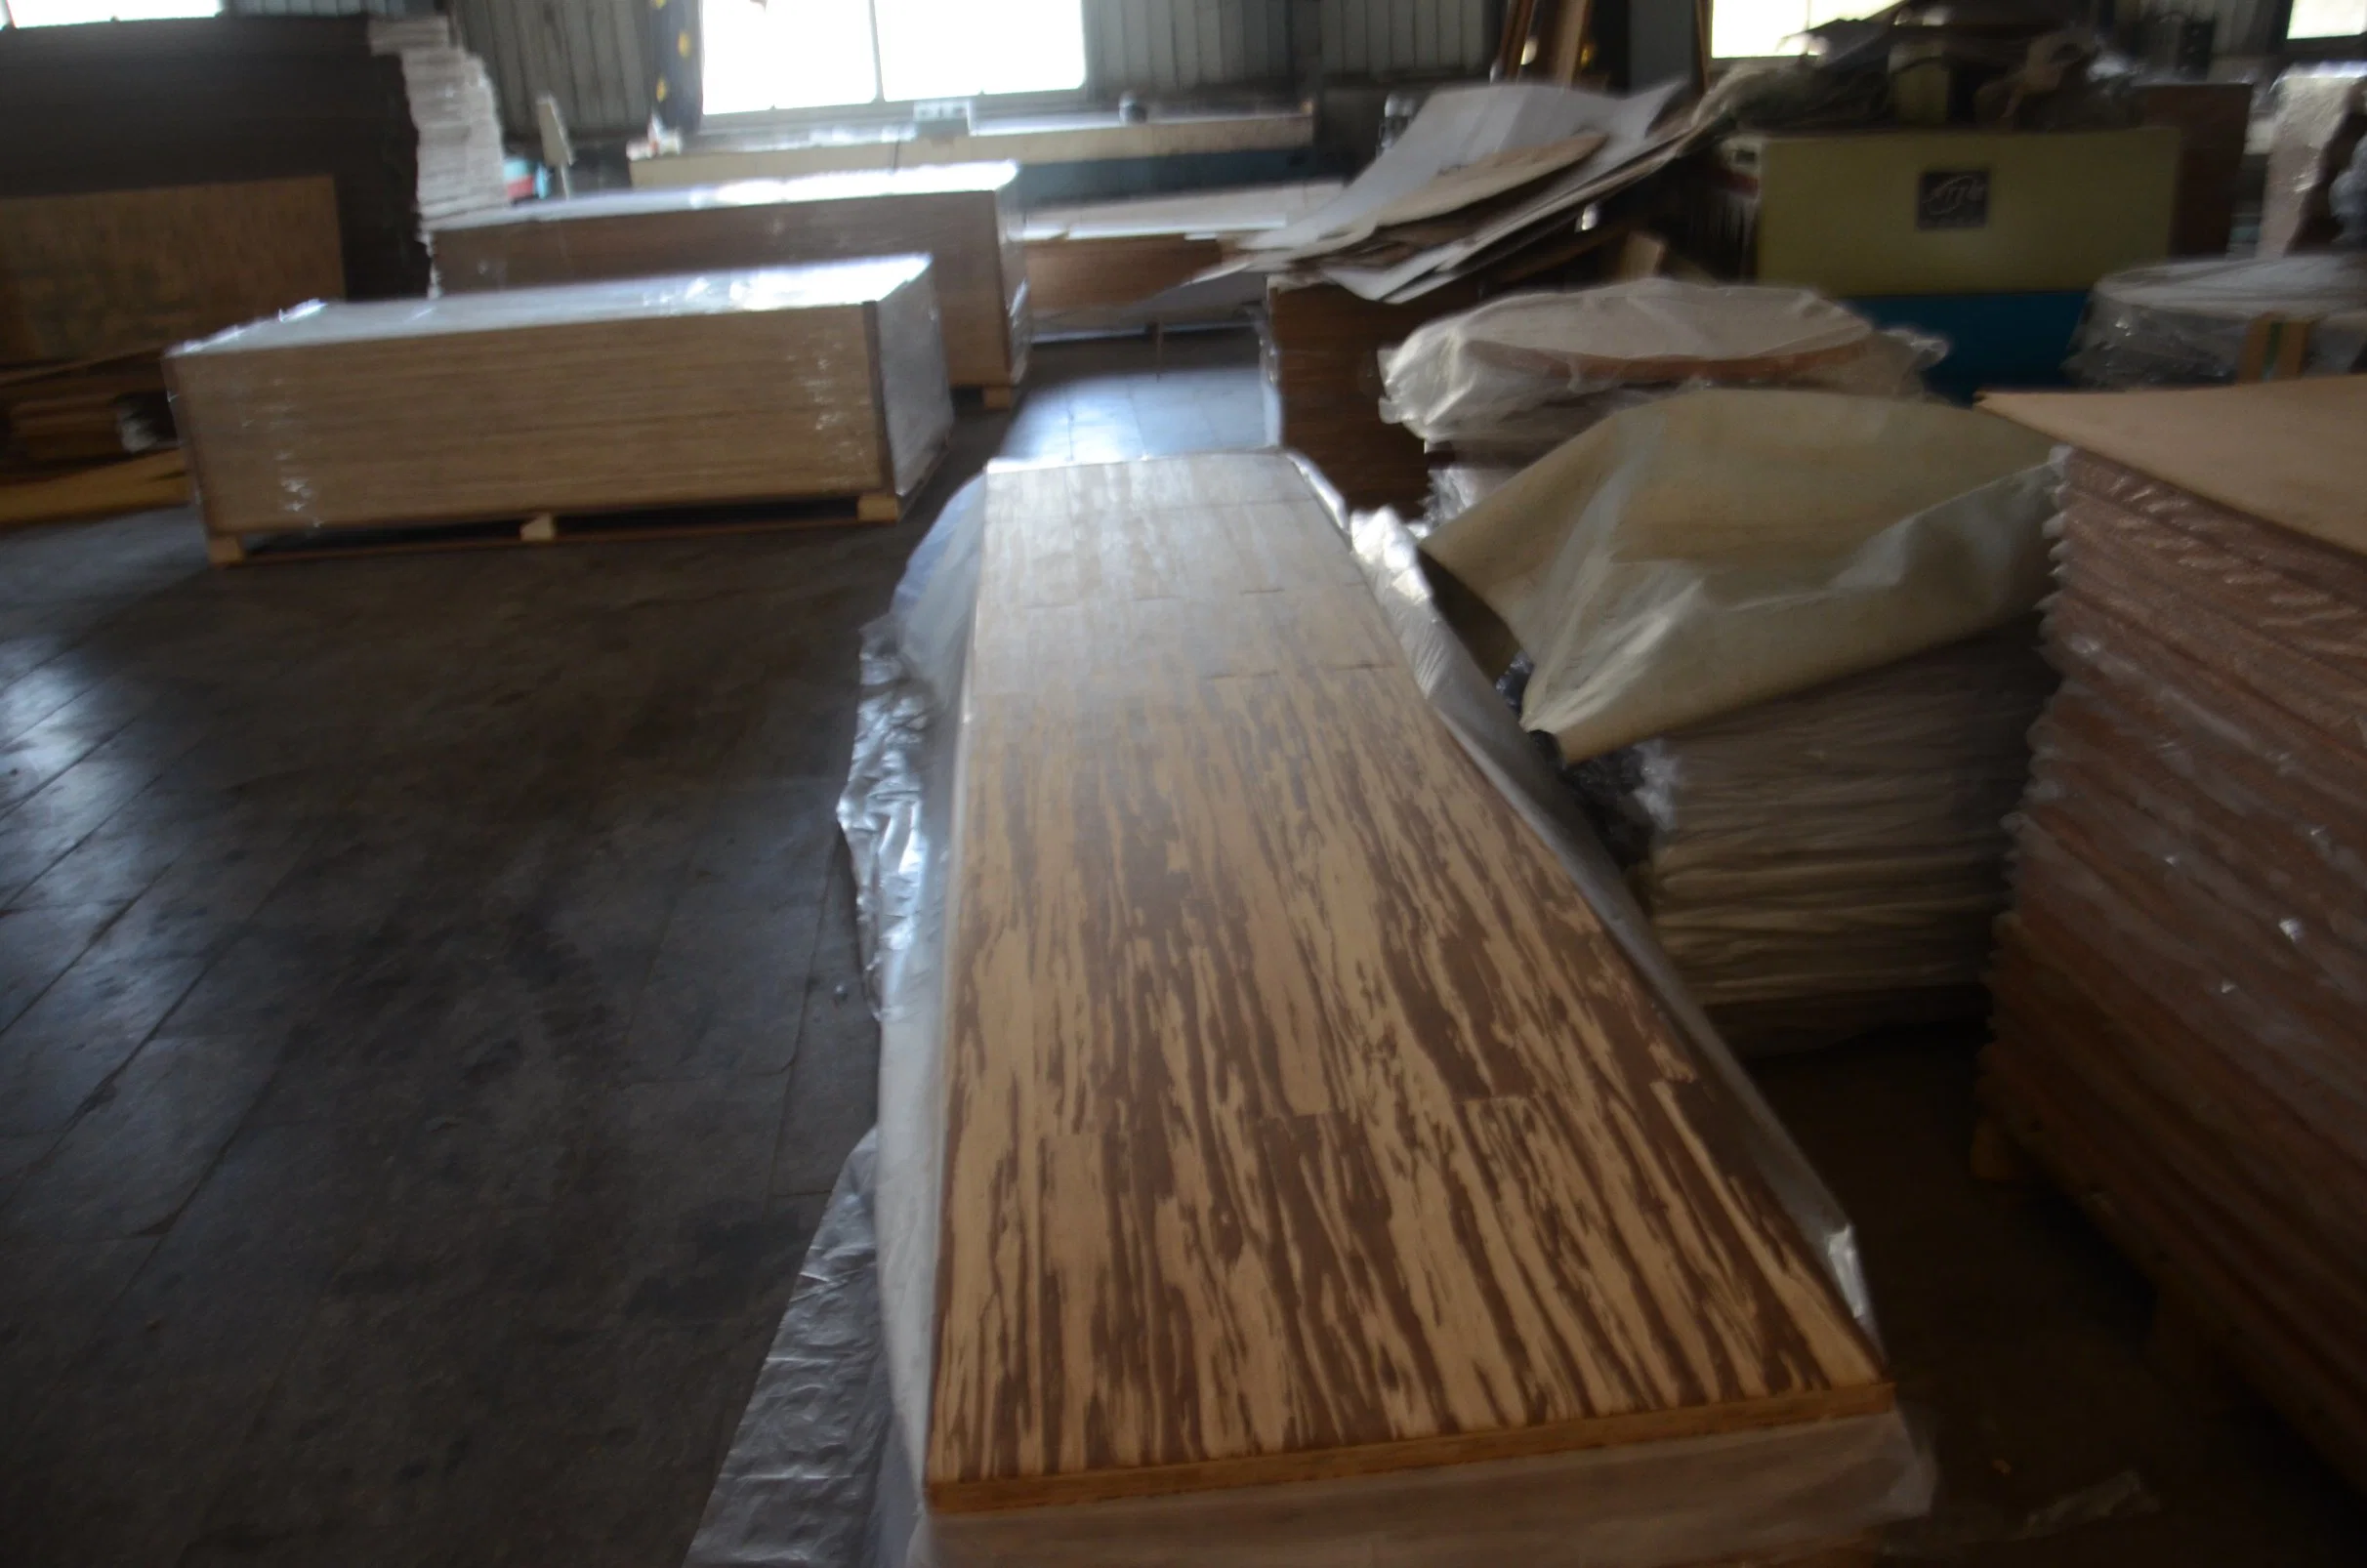 Strand Woven Tiger Flooring Excellent Quality Bamboo Board Source Quality